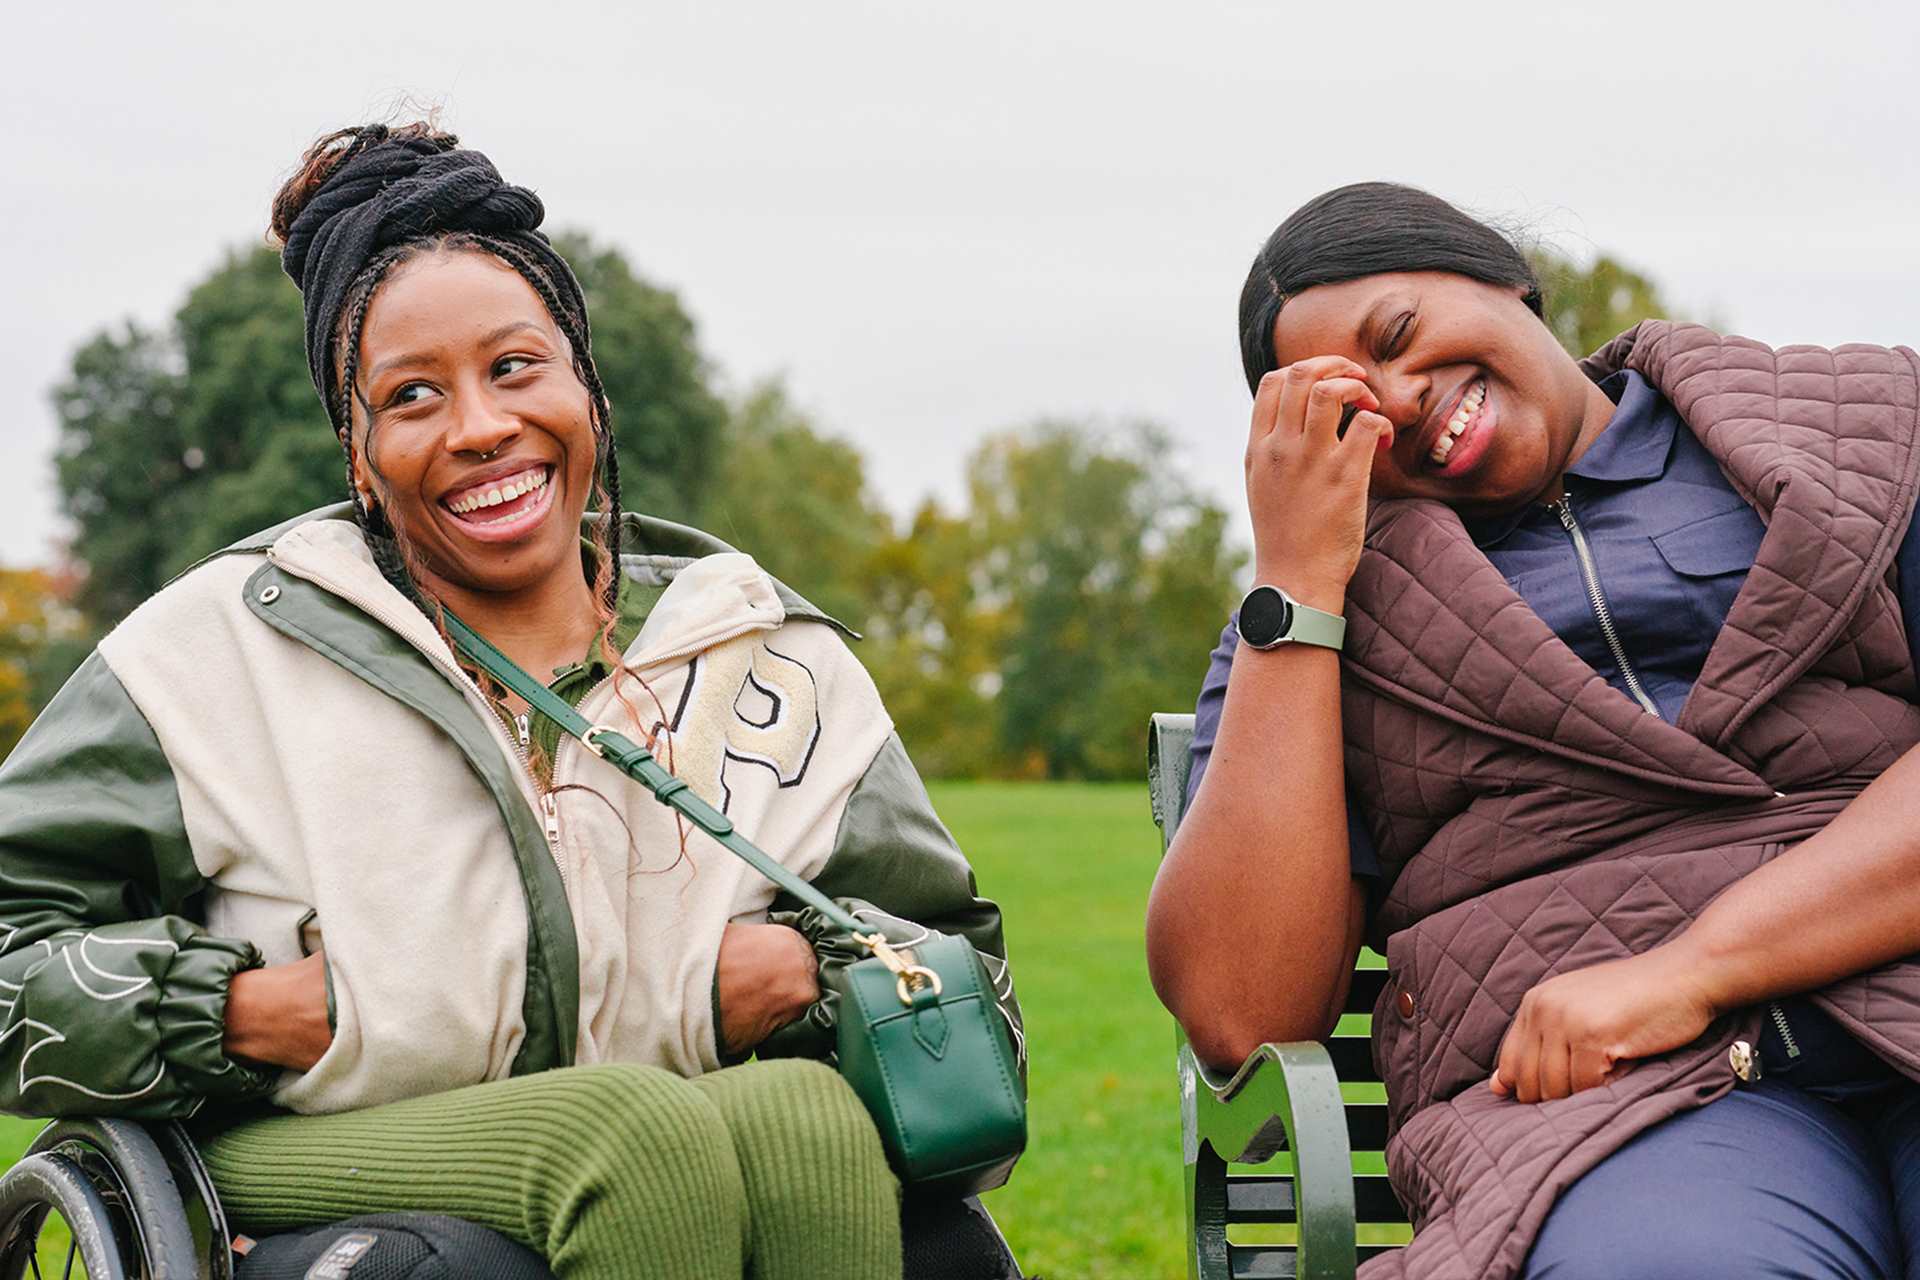 A young Black woman in a wheelchair and an older Black woman sitting on a bench in the park. They are laughing together.